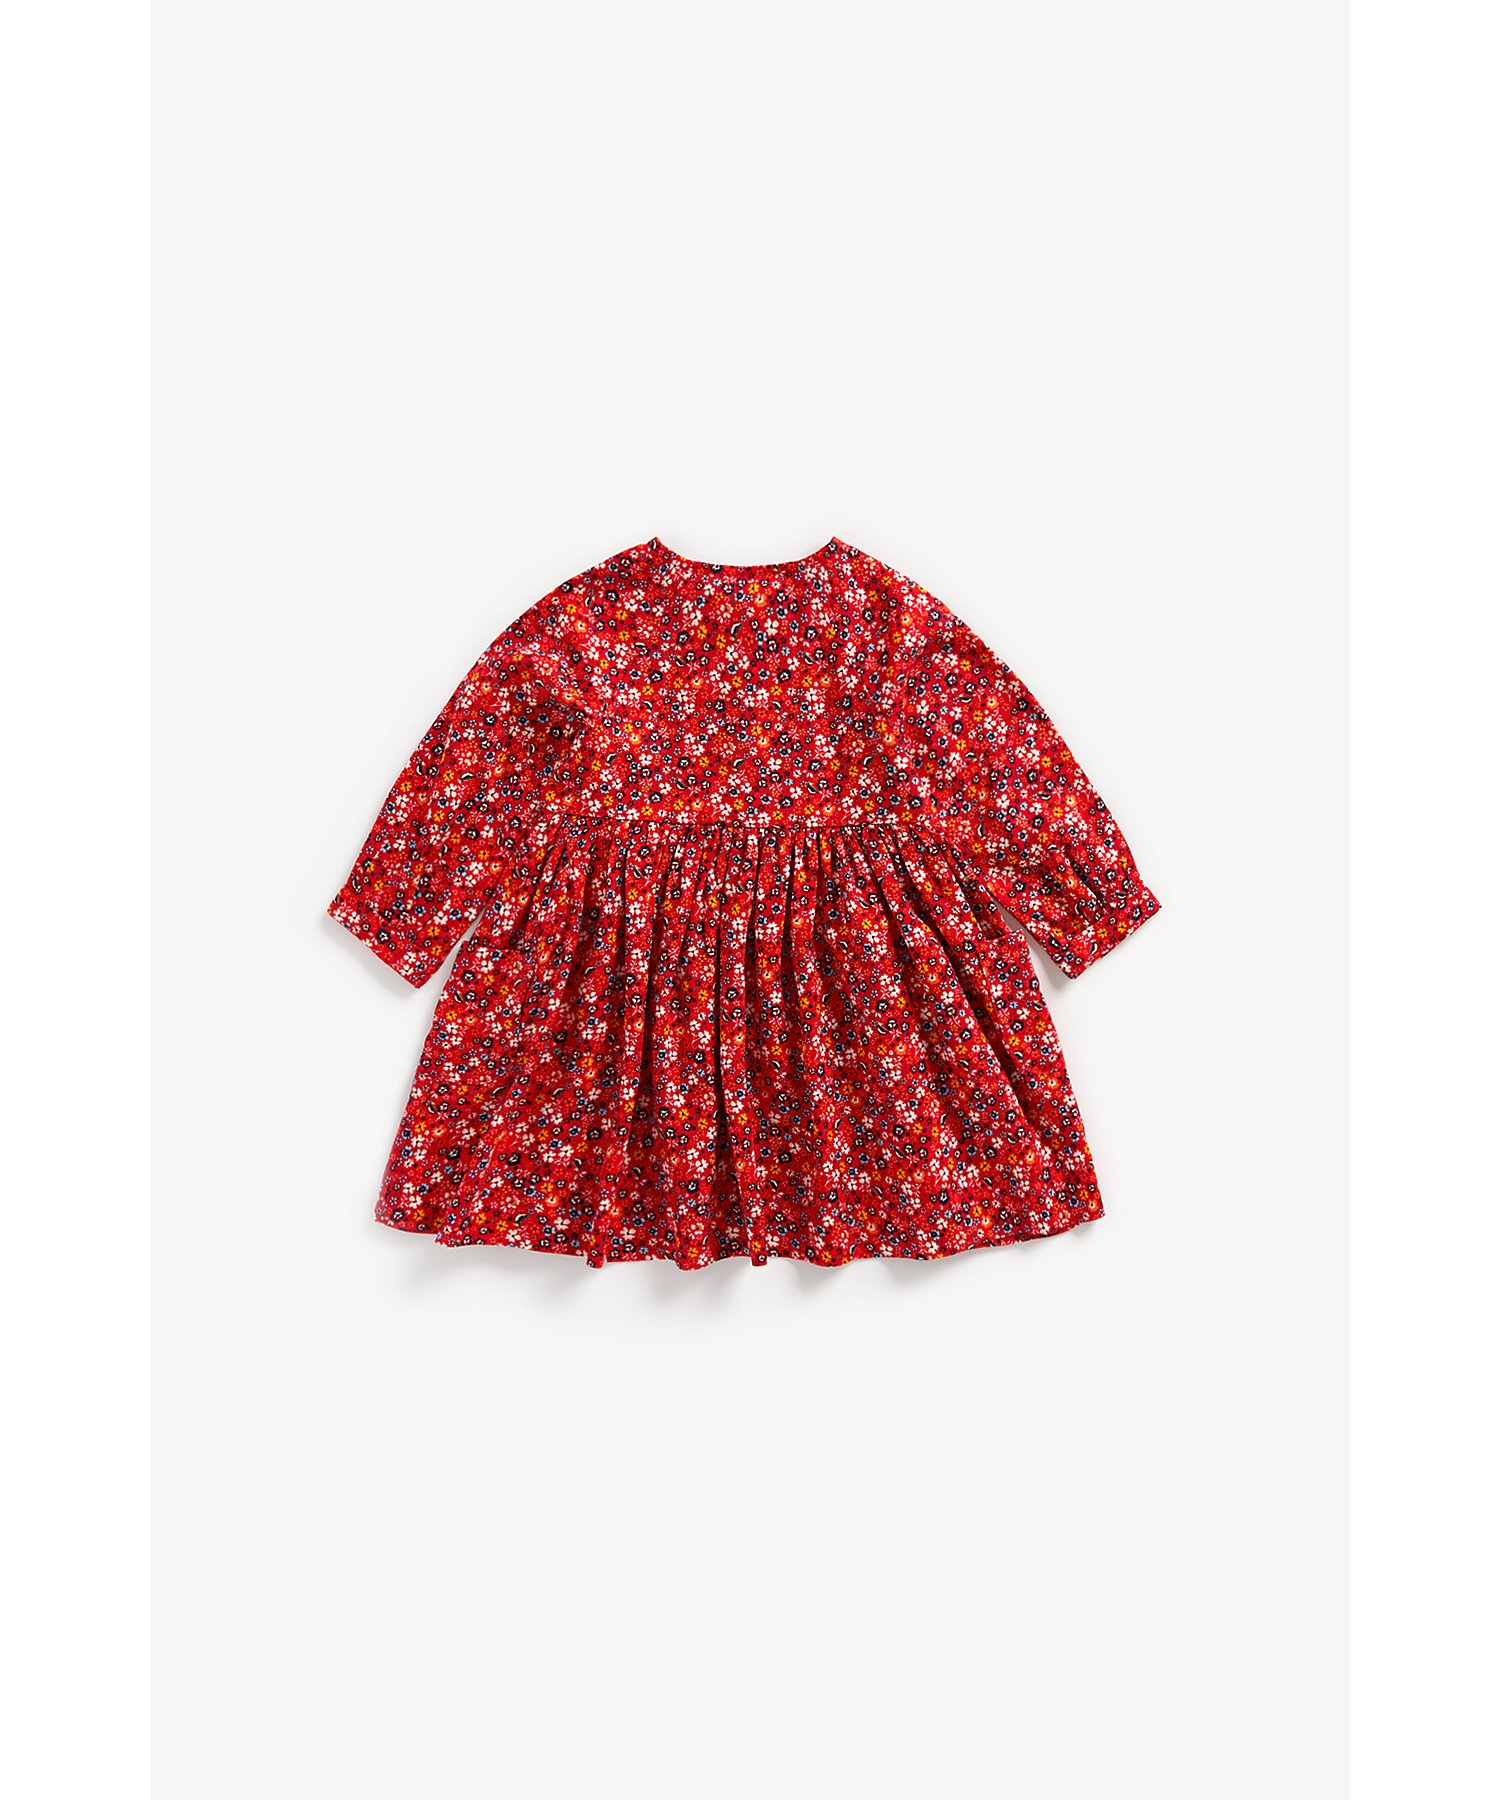 Mothercare | Girls Full Sleeves Dress Floral Print - Red 1